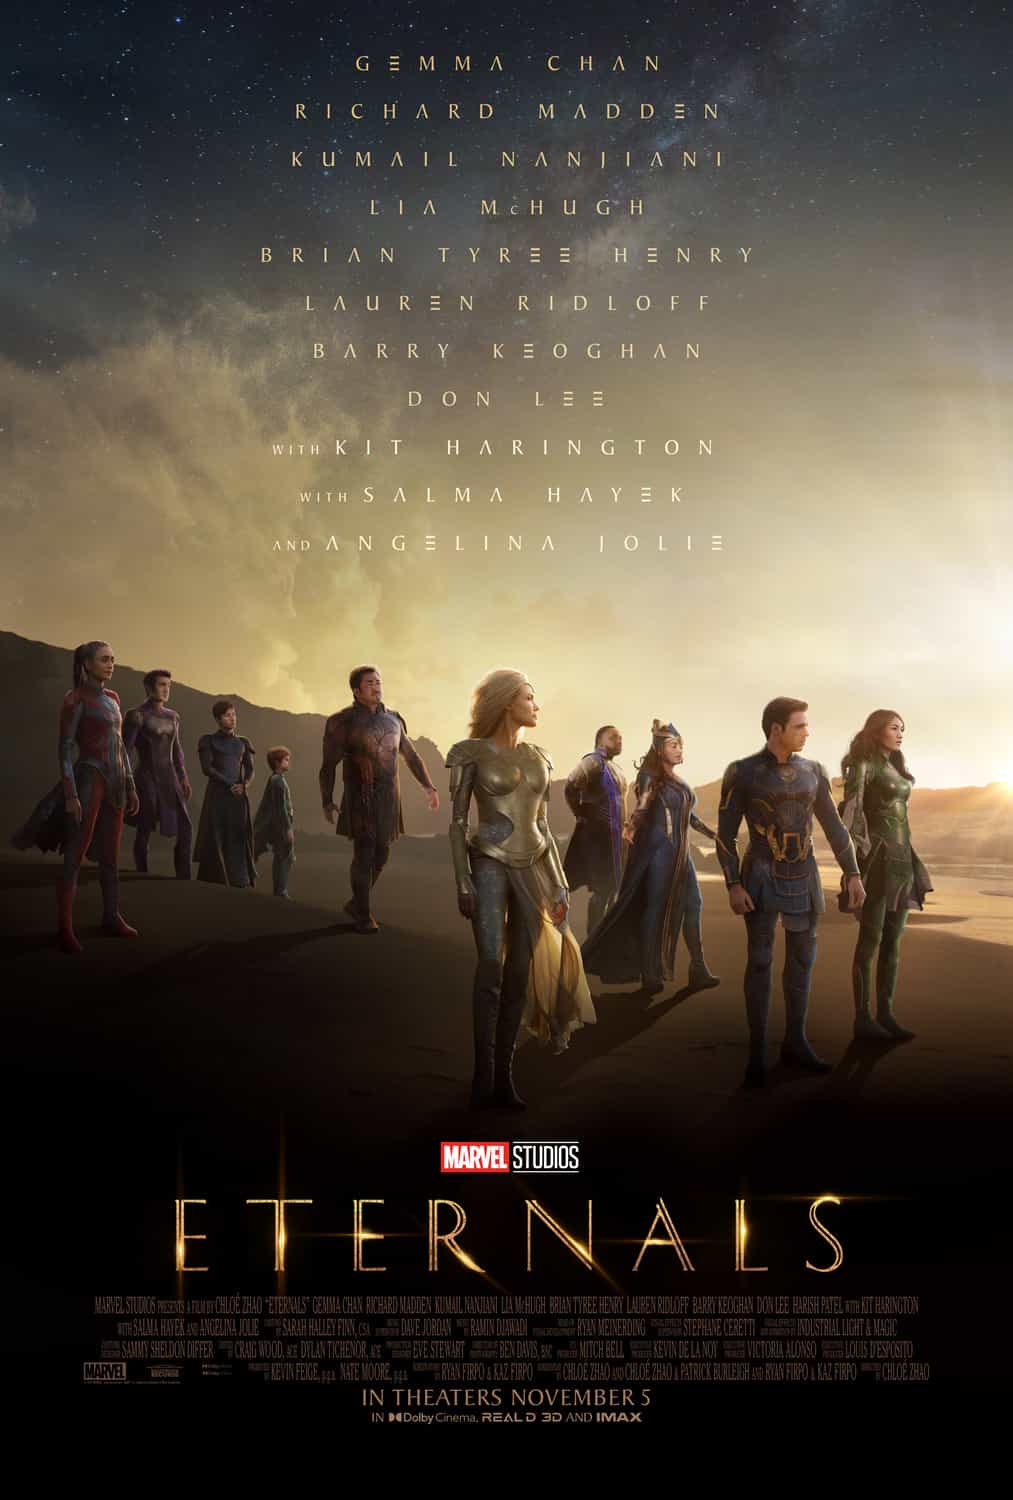 US Box Office Weekend Report 5th - 7th November 2021:  Eternals makes a big debut at the US box office to continue the success of the MCU